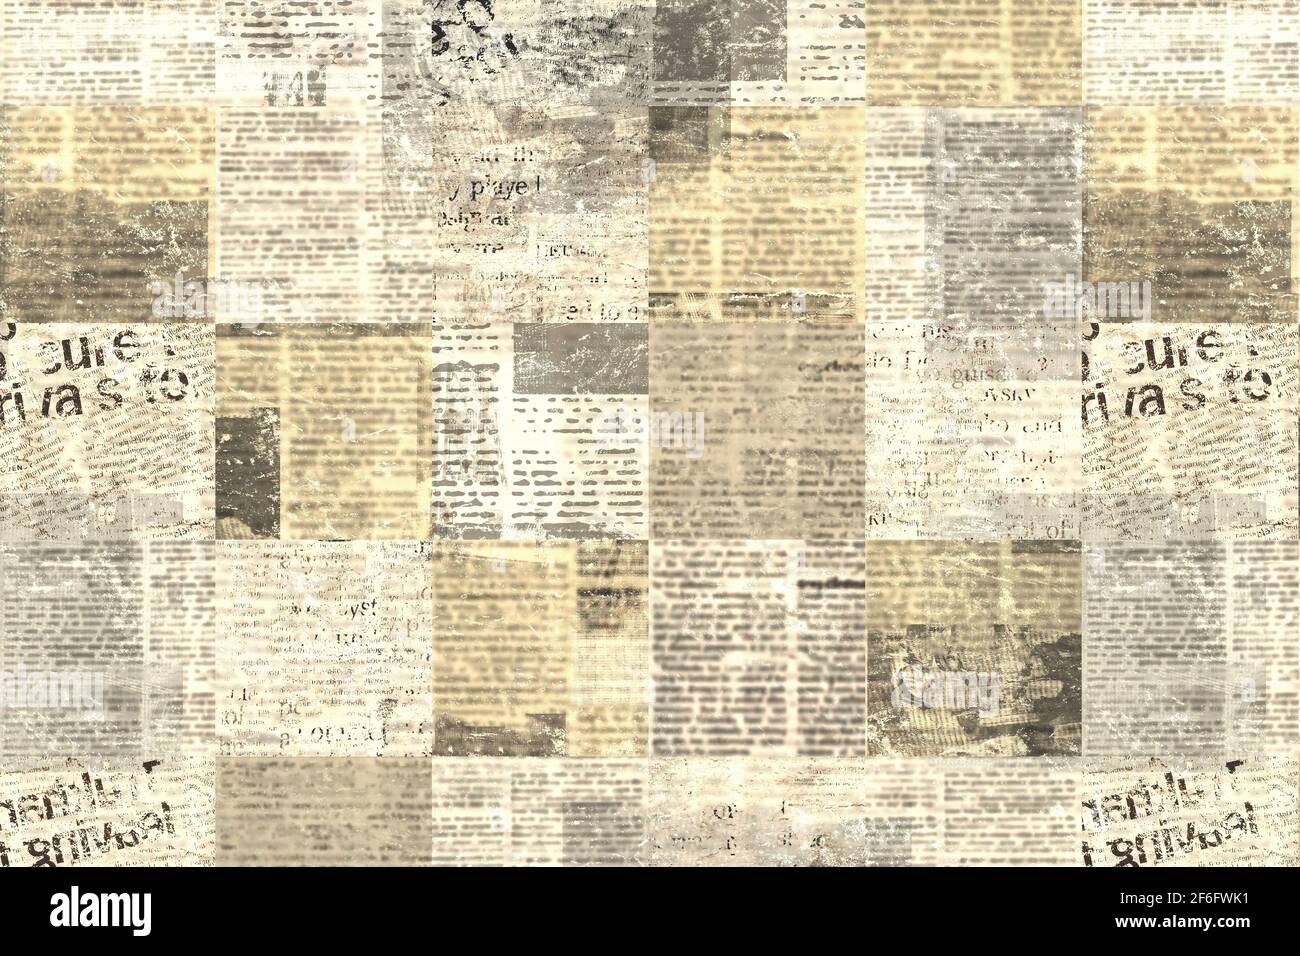 Newspaper Paper Grunge Aged Newsprint Pattern Background Vintage Old Newspapers Template Texture Unreadable News Horizontal Page With Place For Text Stock Photo Alamy